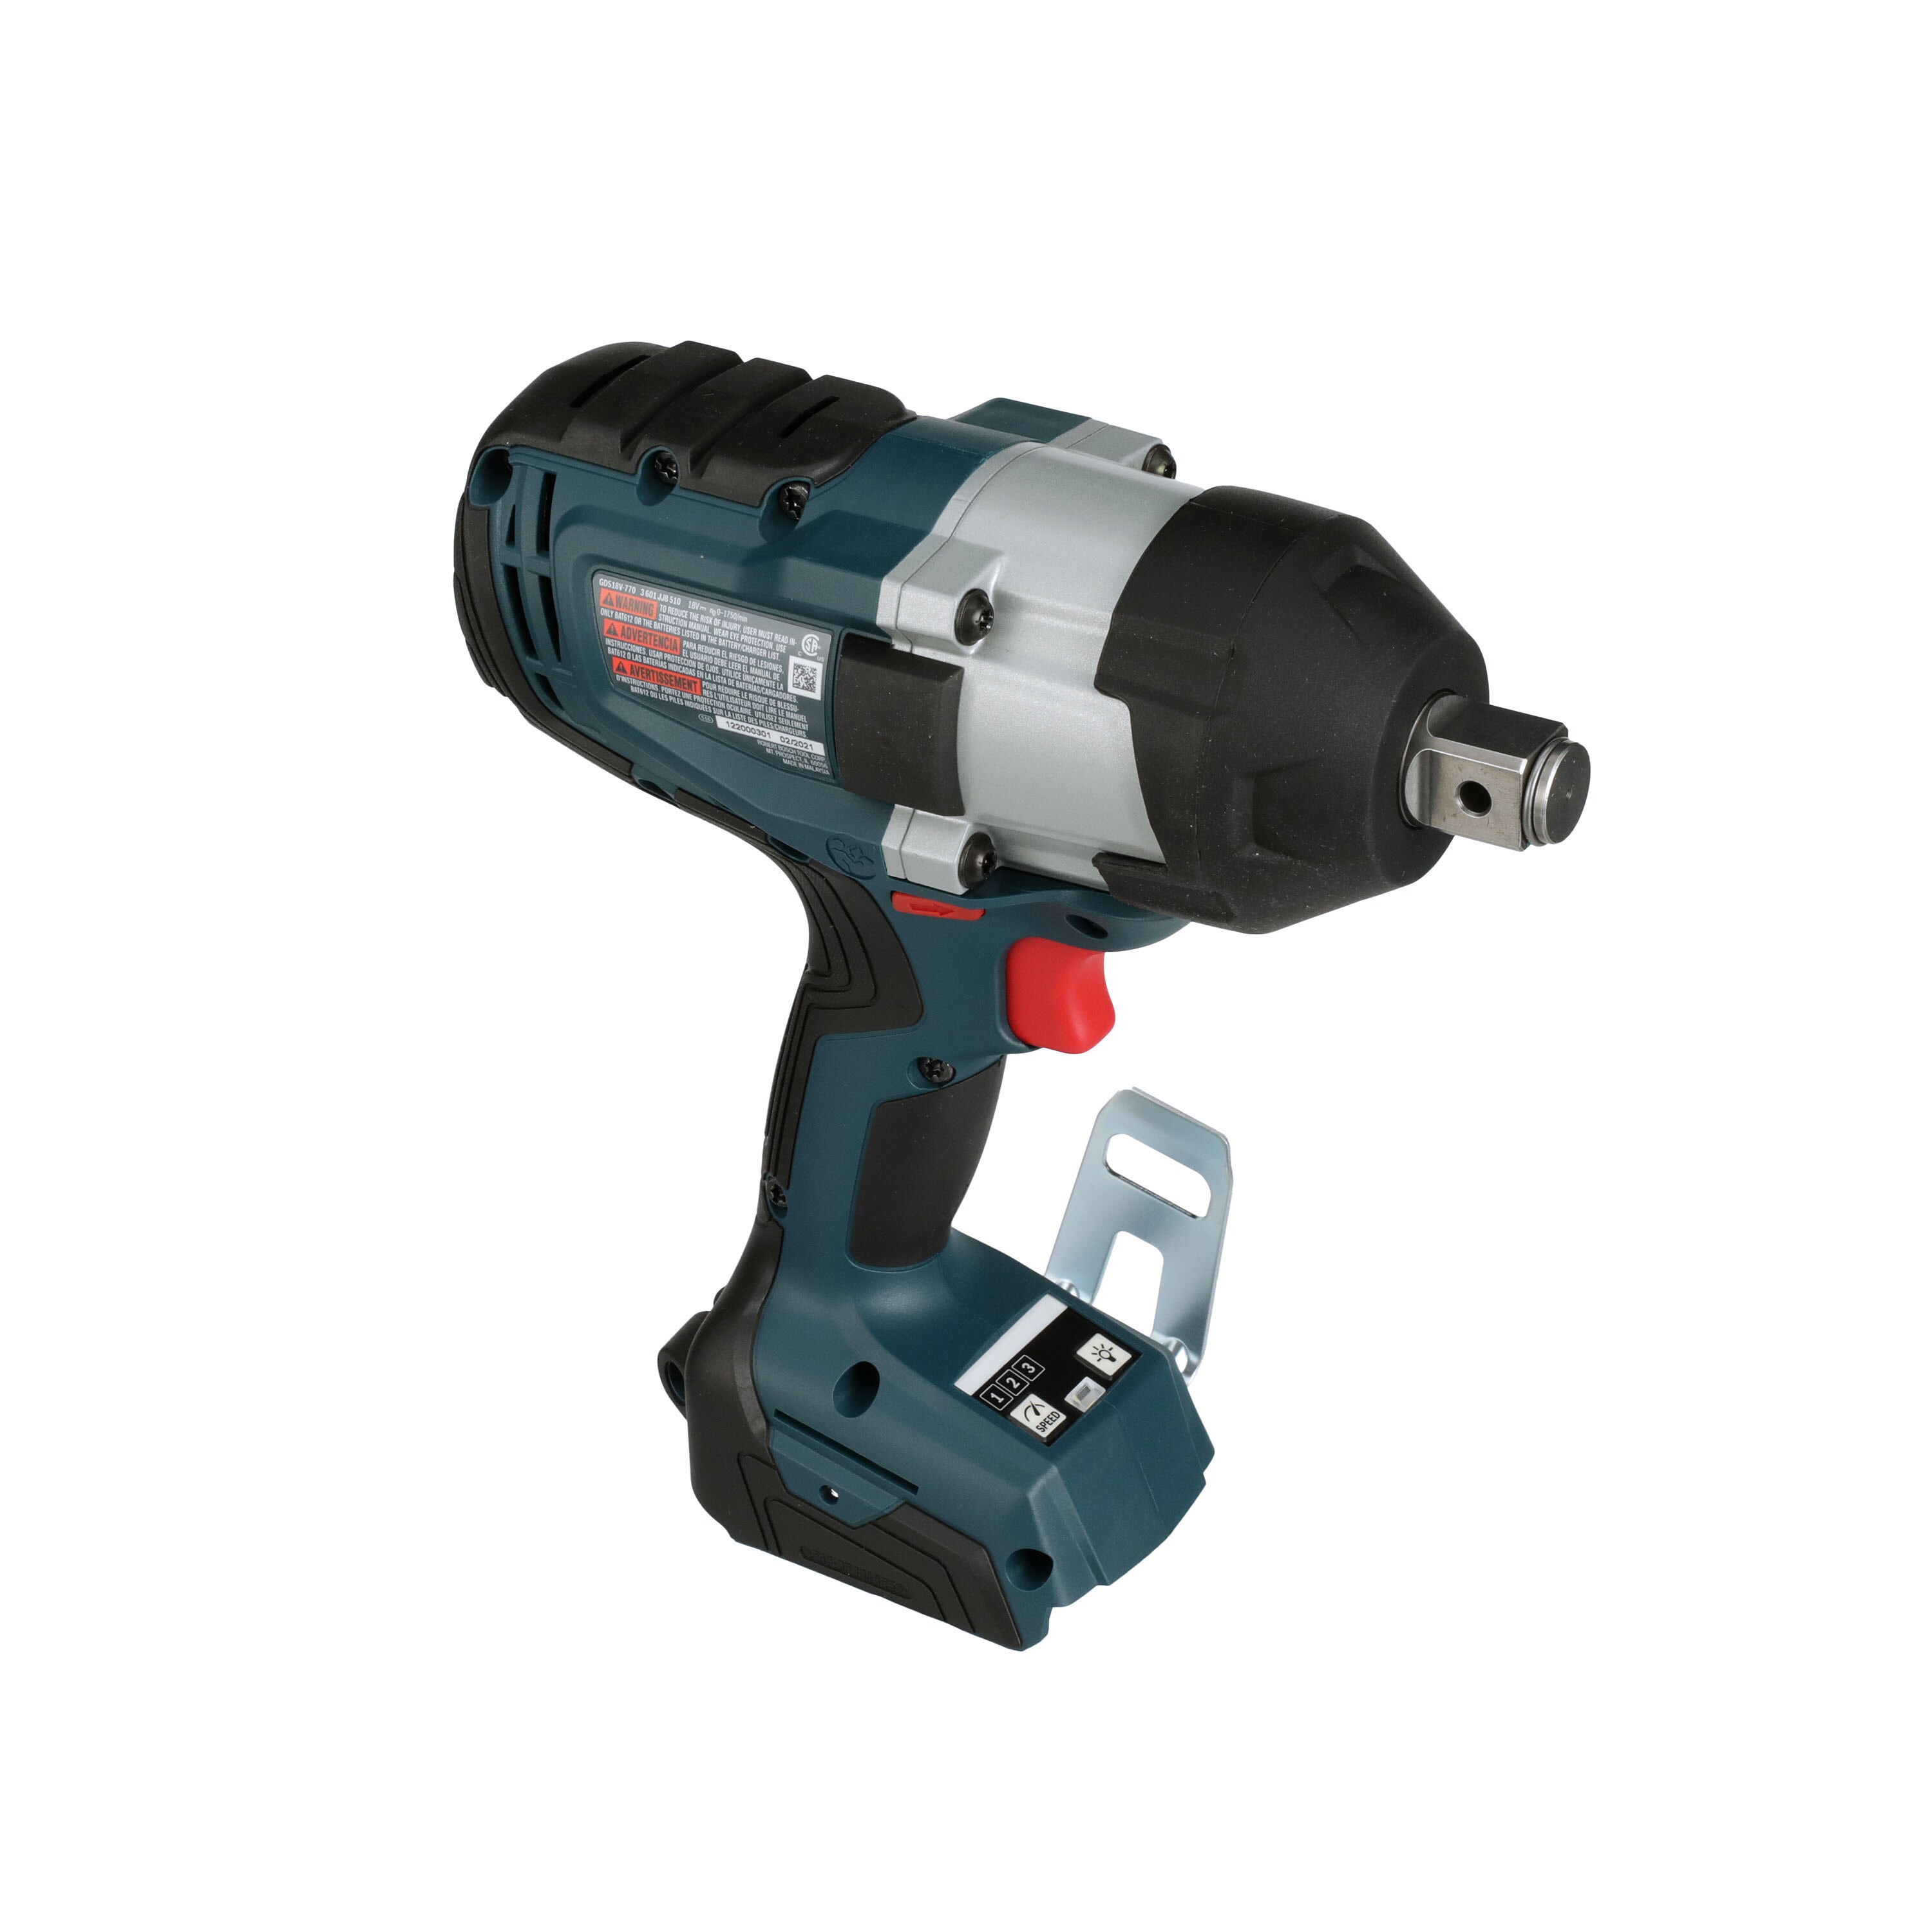 Bosch GDS 18V-400 Cordless Impact Wrench Machine 400Nm Electric Wrench 1/2  Square Chuck Bosch Professional 18V Power Tool New